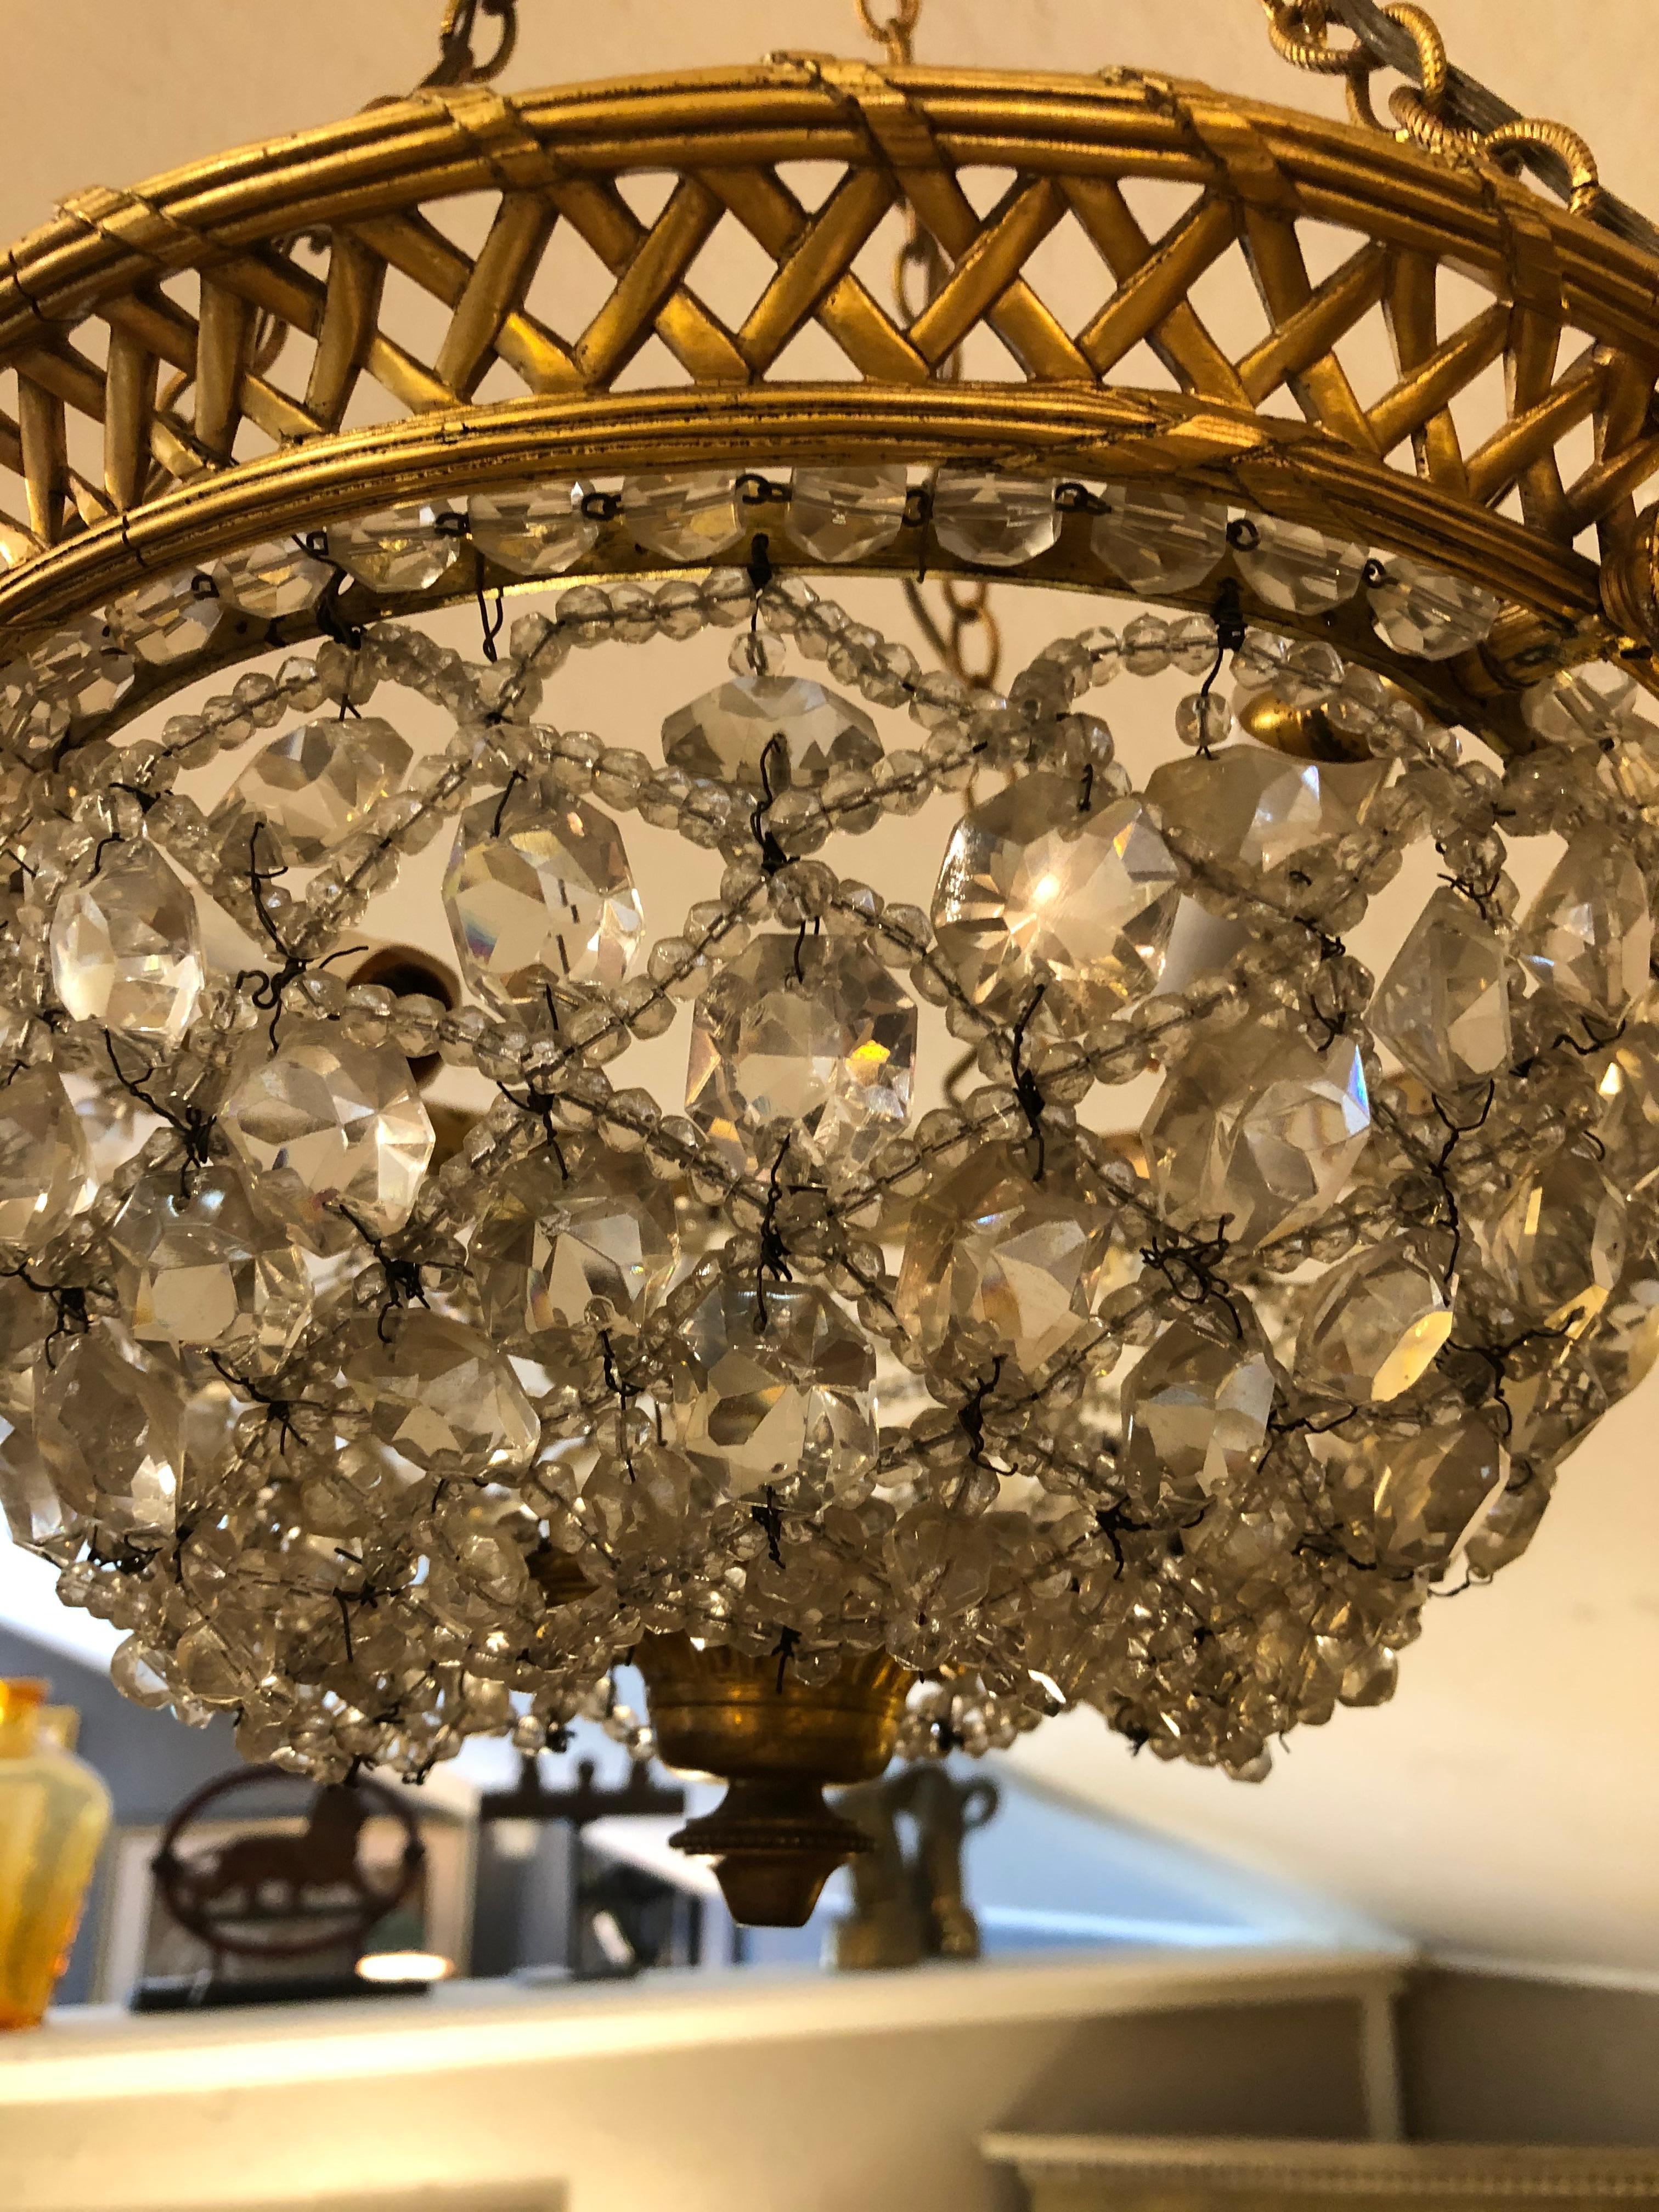 A lovely dome-shaped or basket style vintage fixture having ornate brass structure, chain and original ceiling CAP with rich crystal encrusted drop dome. 3 interior sockets for 40 watt bulbs.
Measures: Basket itself is 8